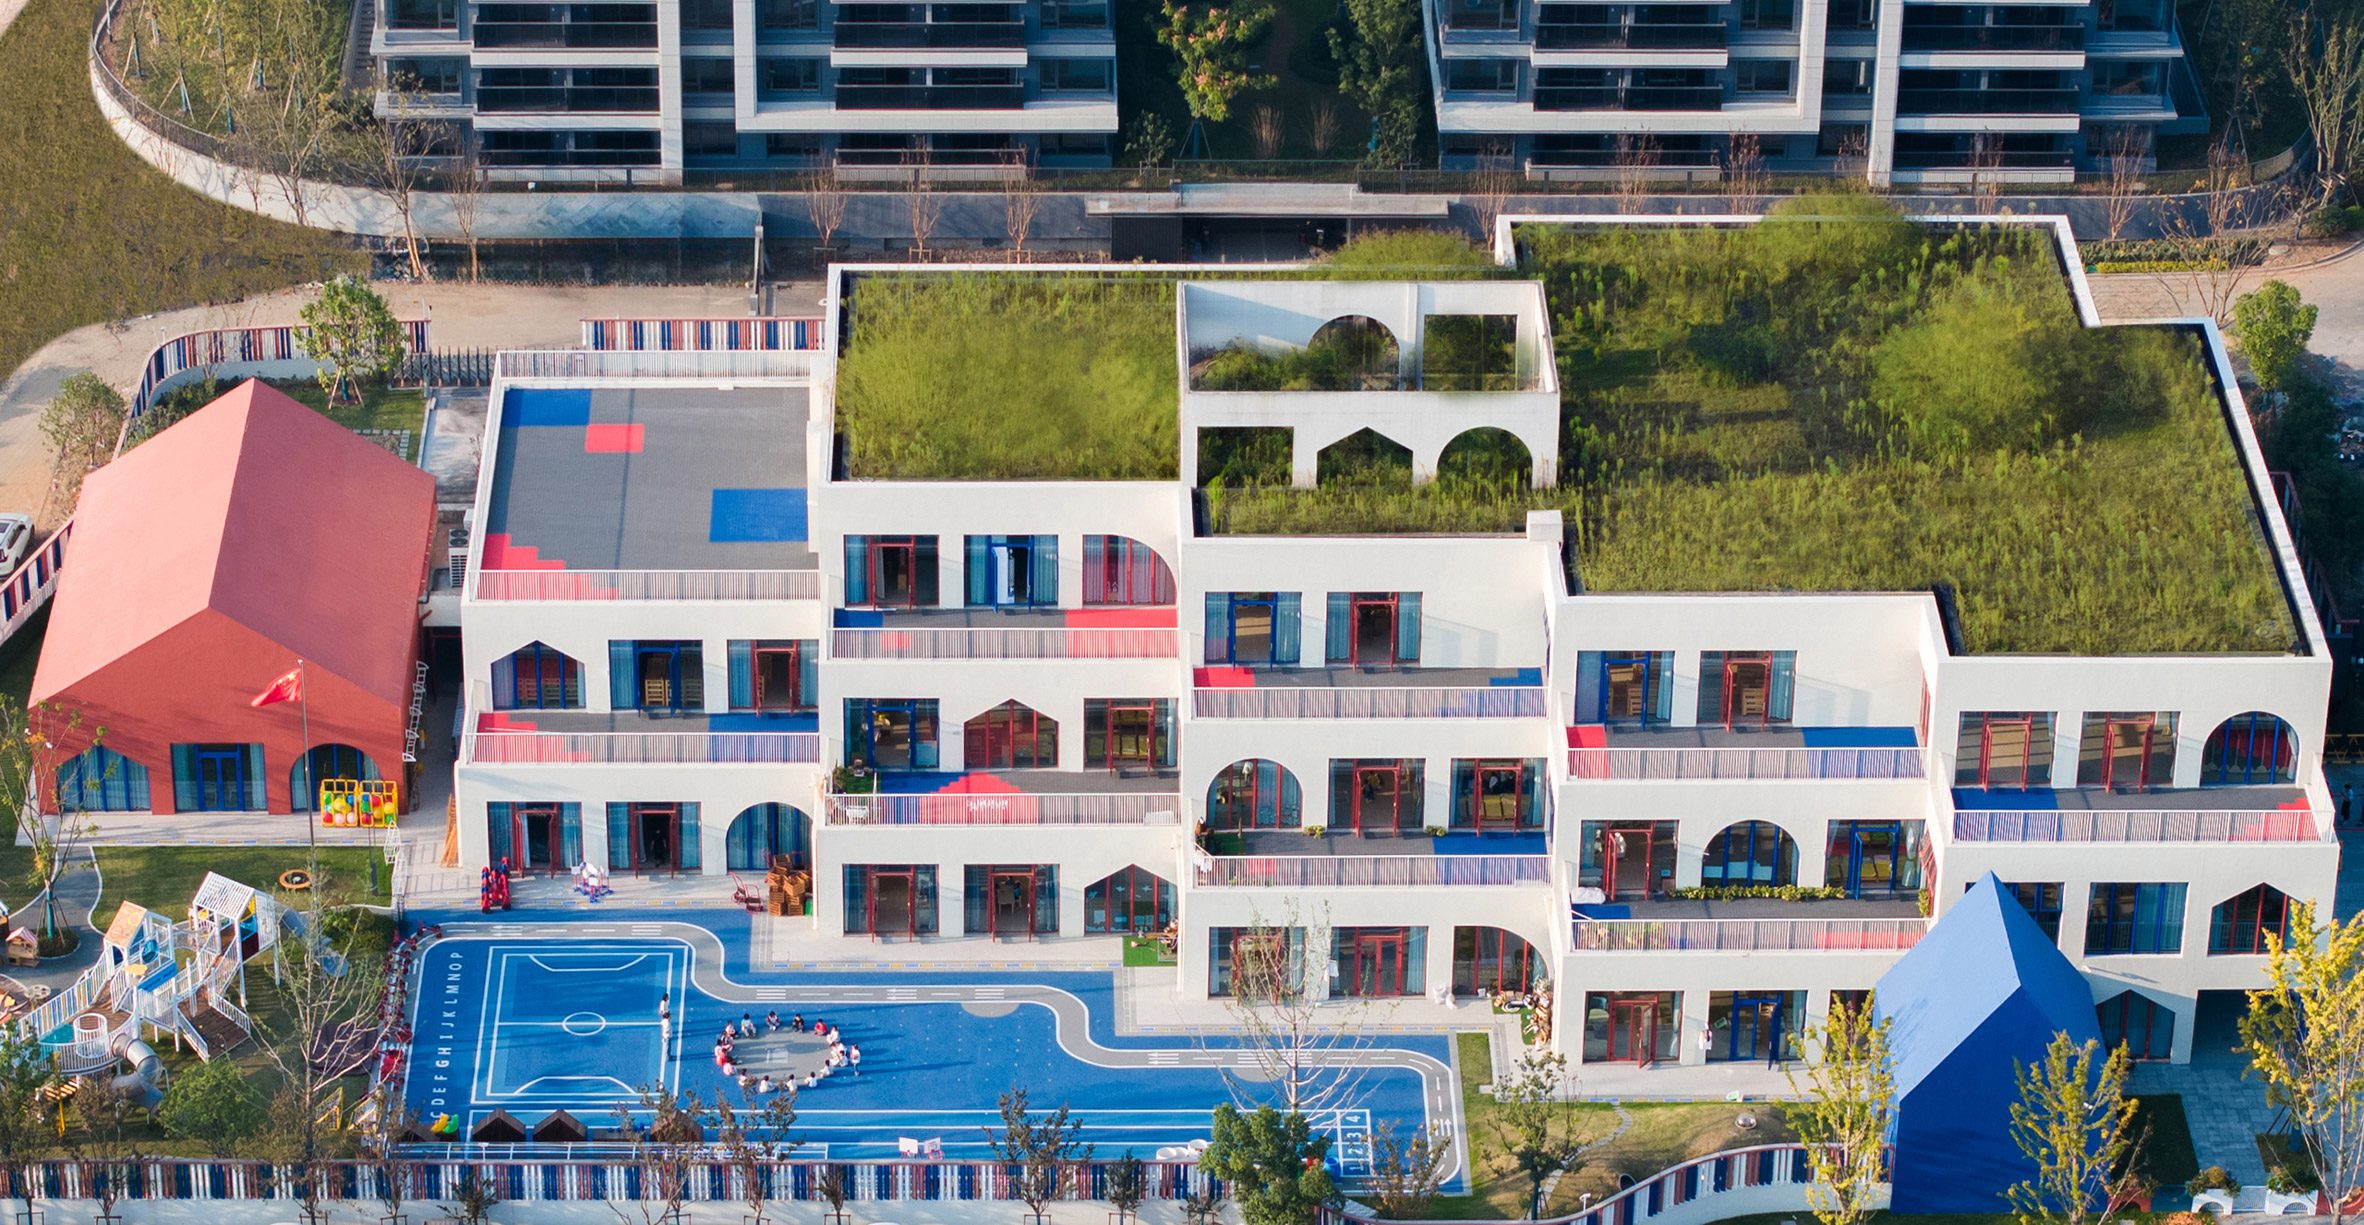 Aerial view of West Coast Kindergarten by CLOU Architects